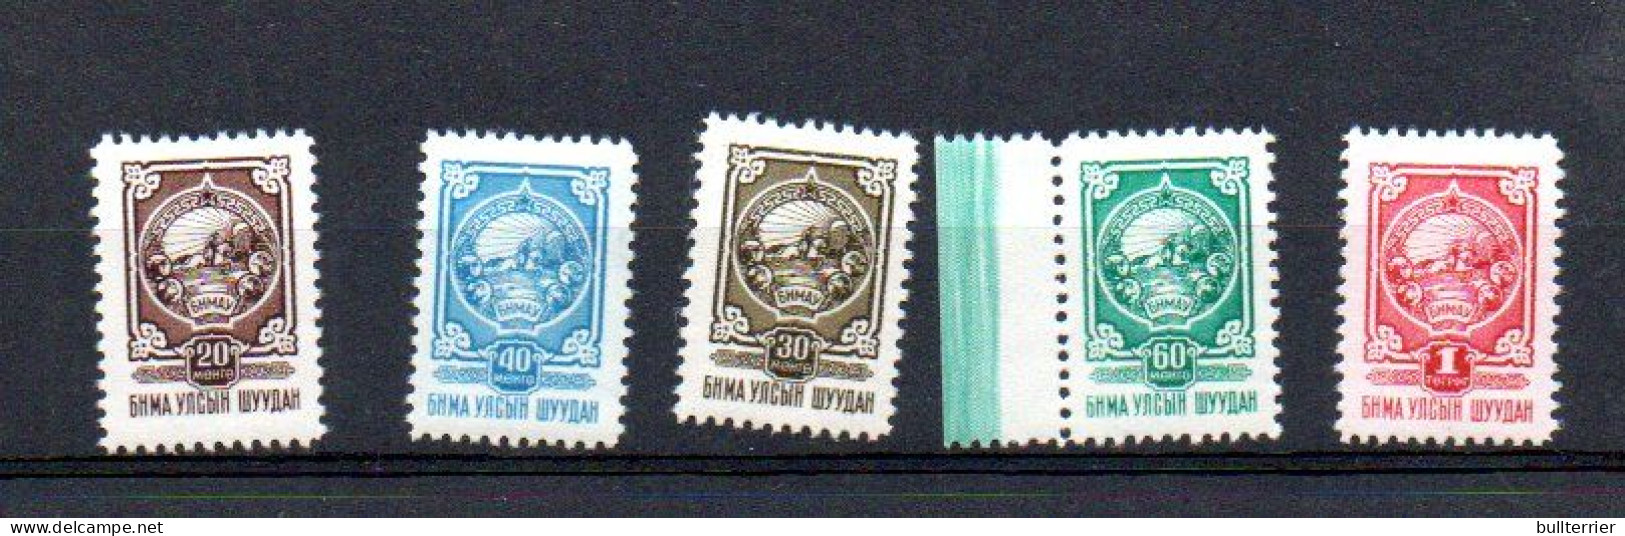 MONGOLIA - 1956 - ARMS SET OF 5 MINT NEVER HINGED - Mongolie